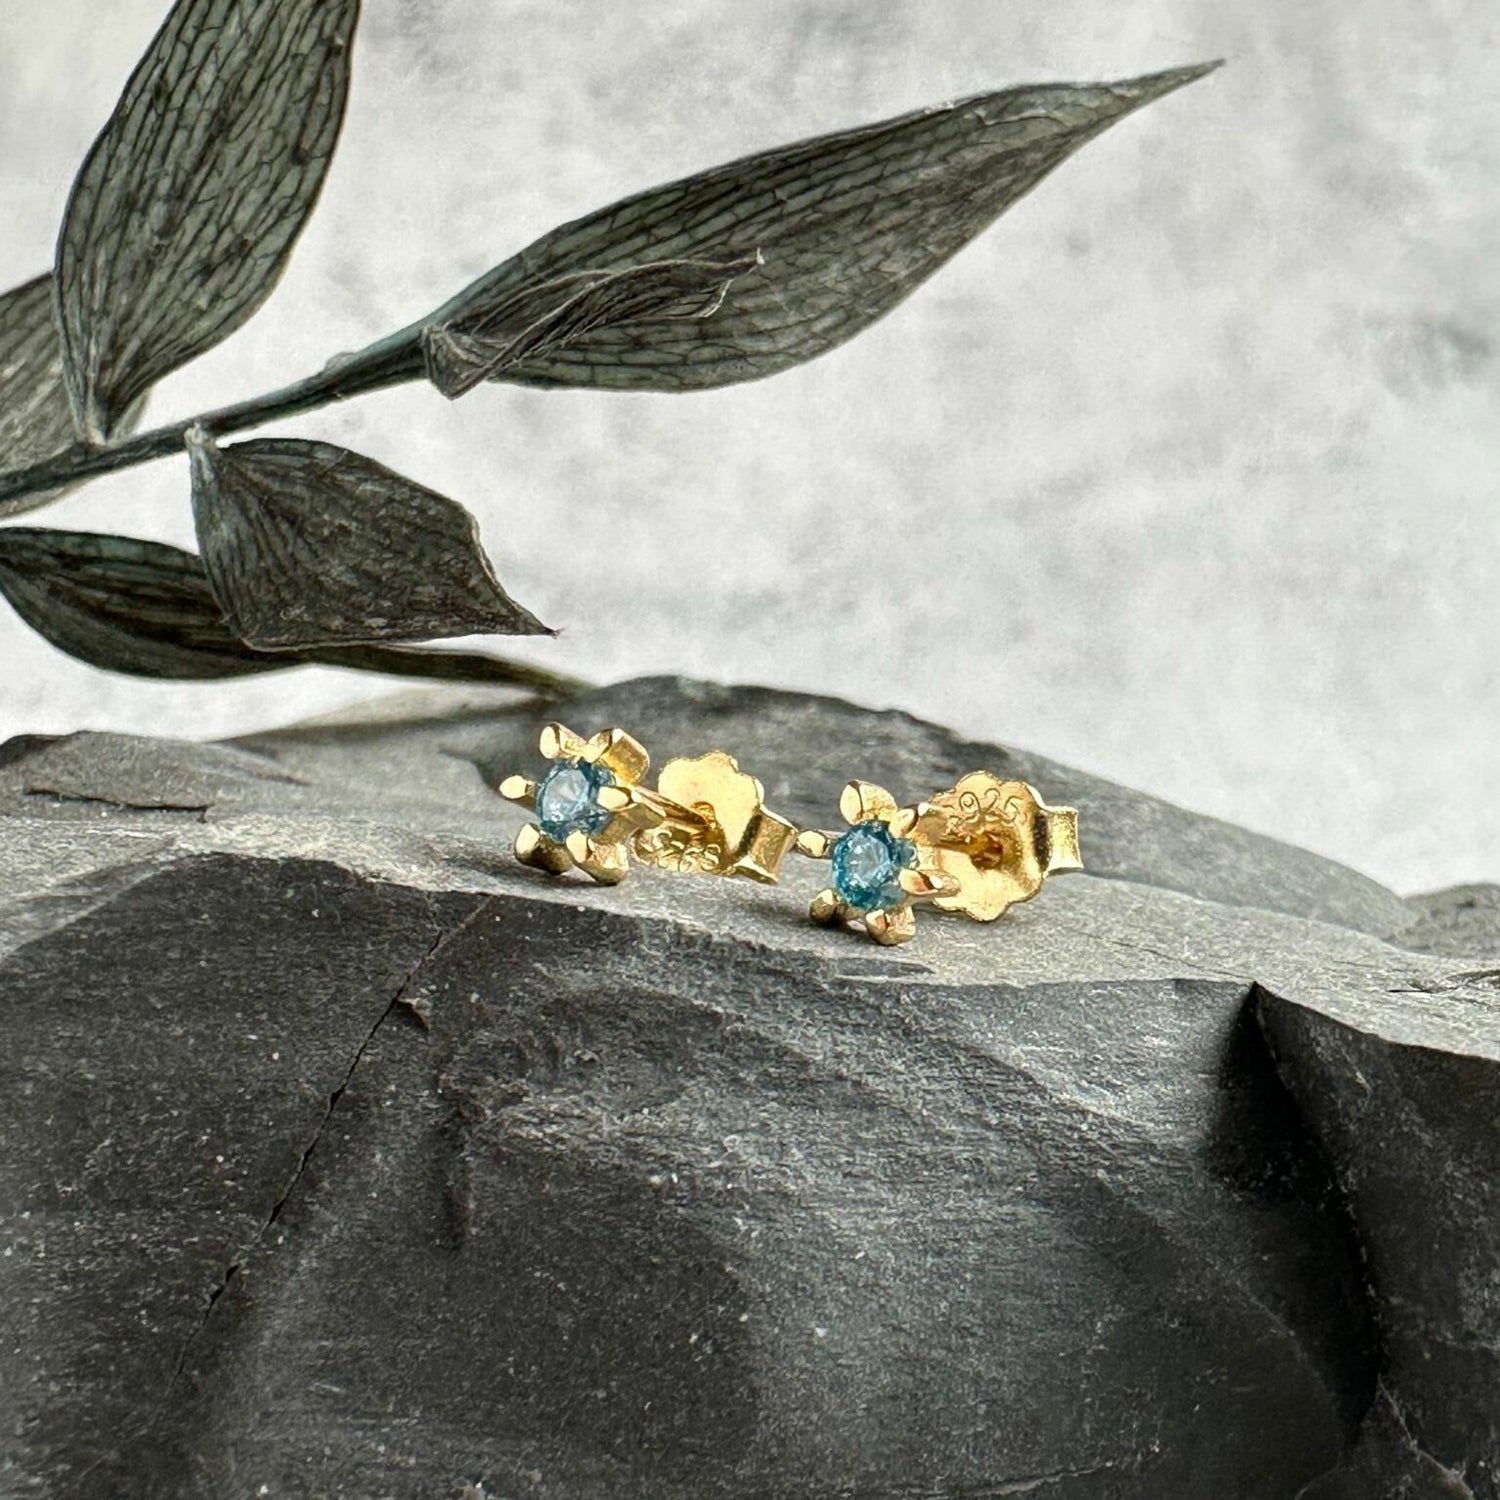 EVE - Stud Earrings - Sterling Silver - Gold Plated - CZ